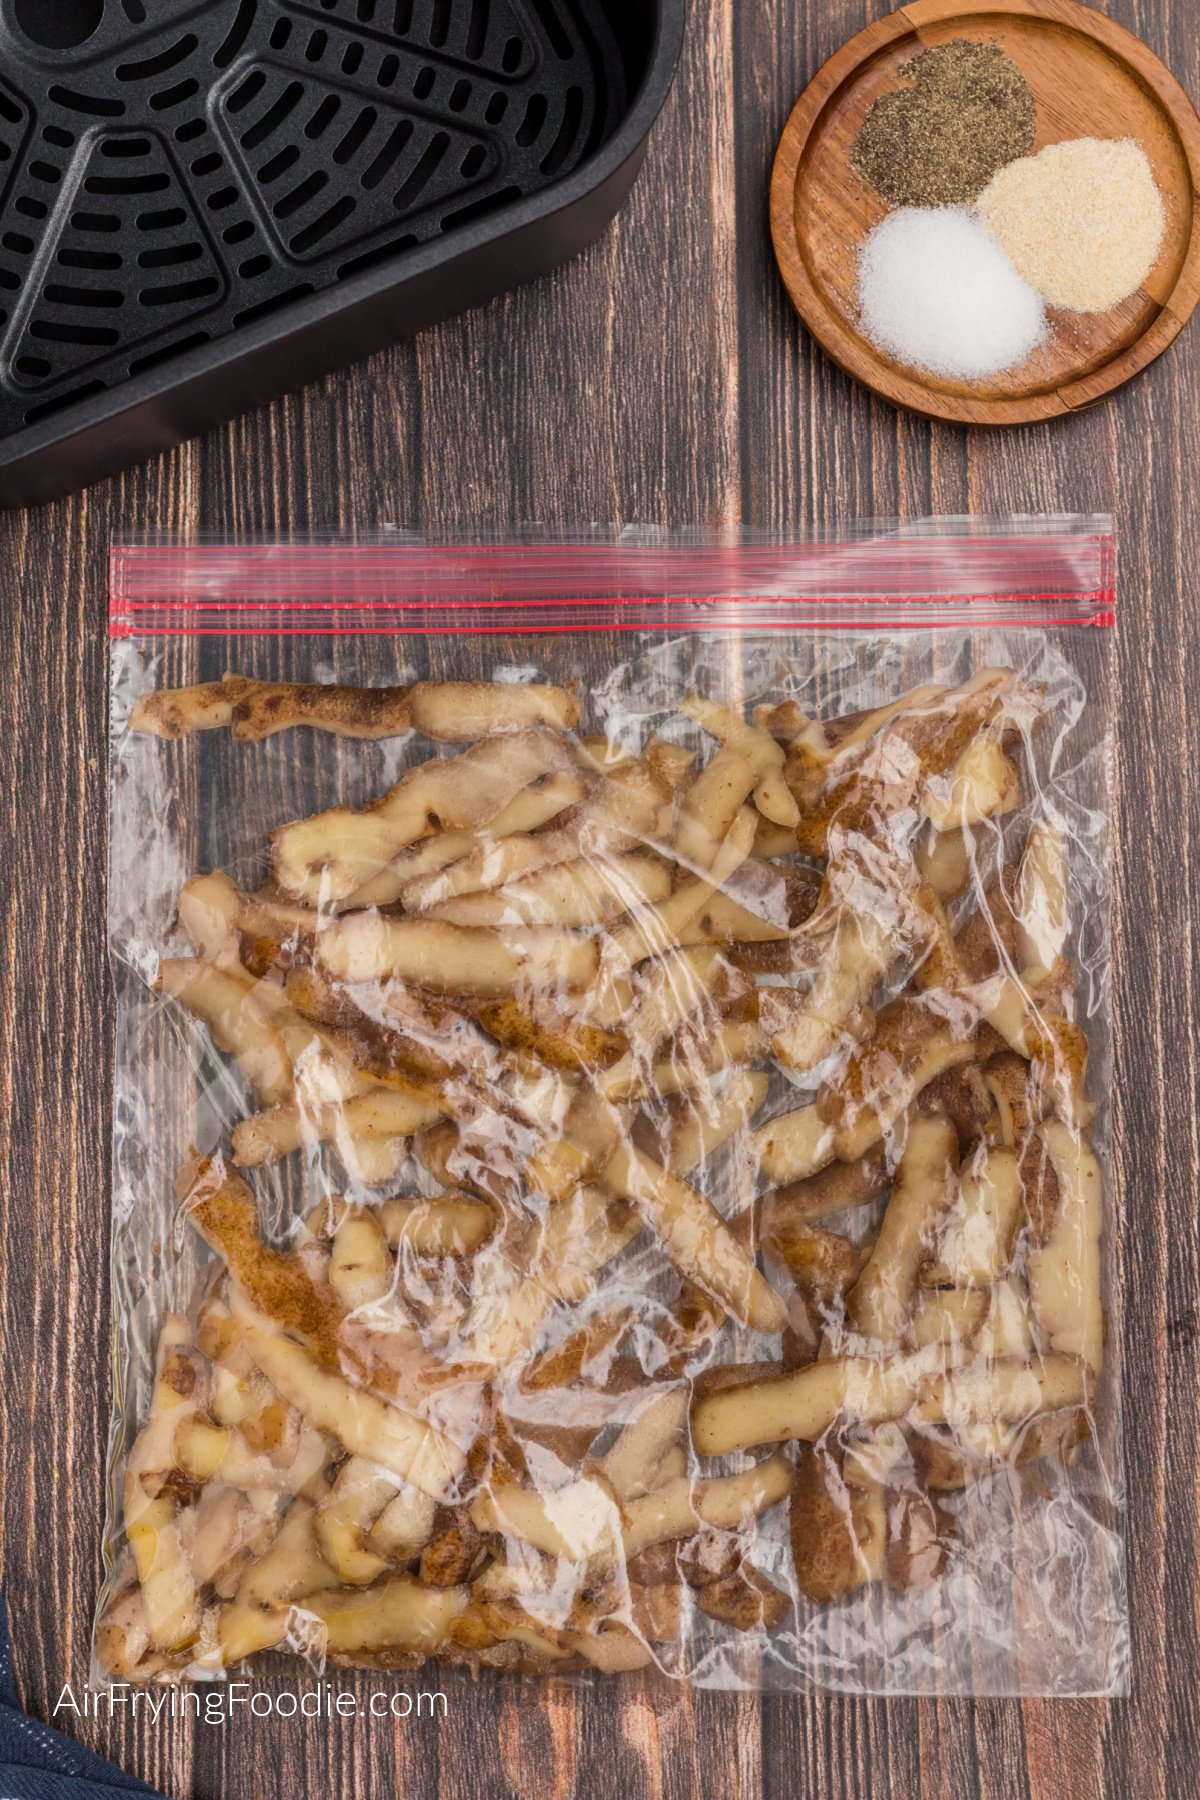 Potato peelings and oil in a plastic sealed bag.